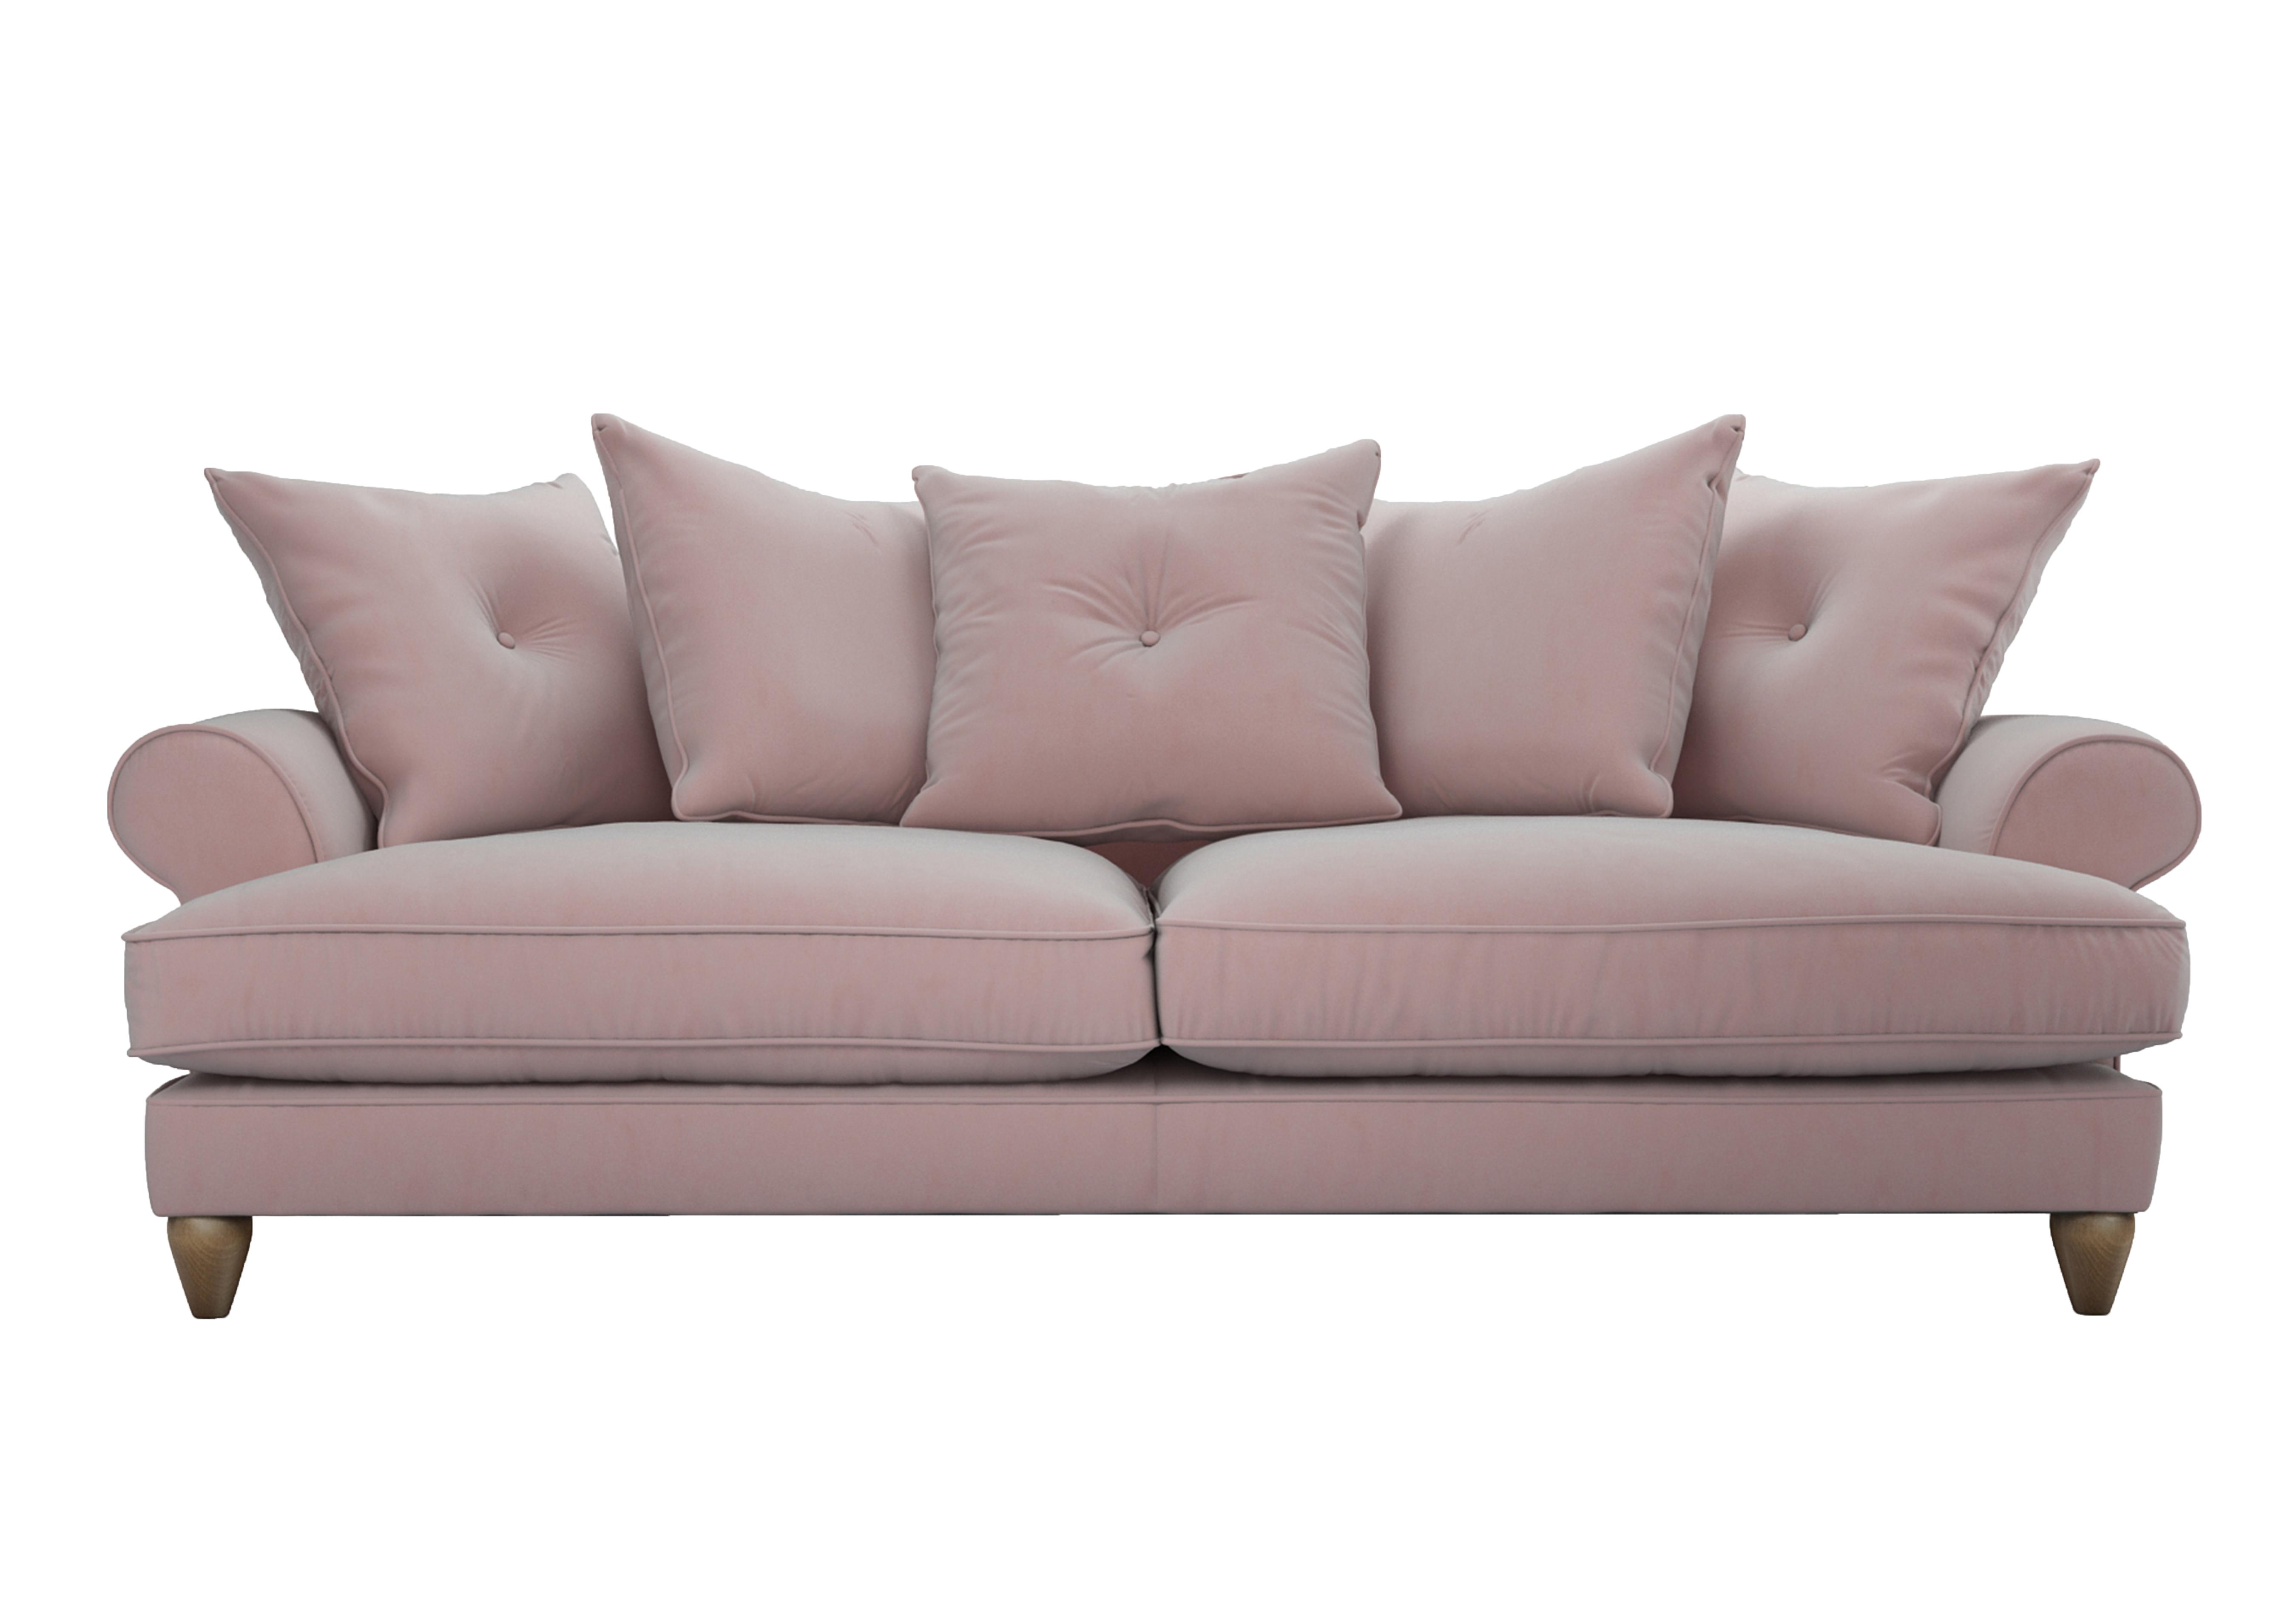 Bronwyn 4 Seater Fabric Scatter Back Sofa in Cot256 Cotton Candy on Furniture Village